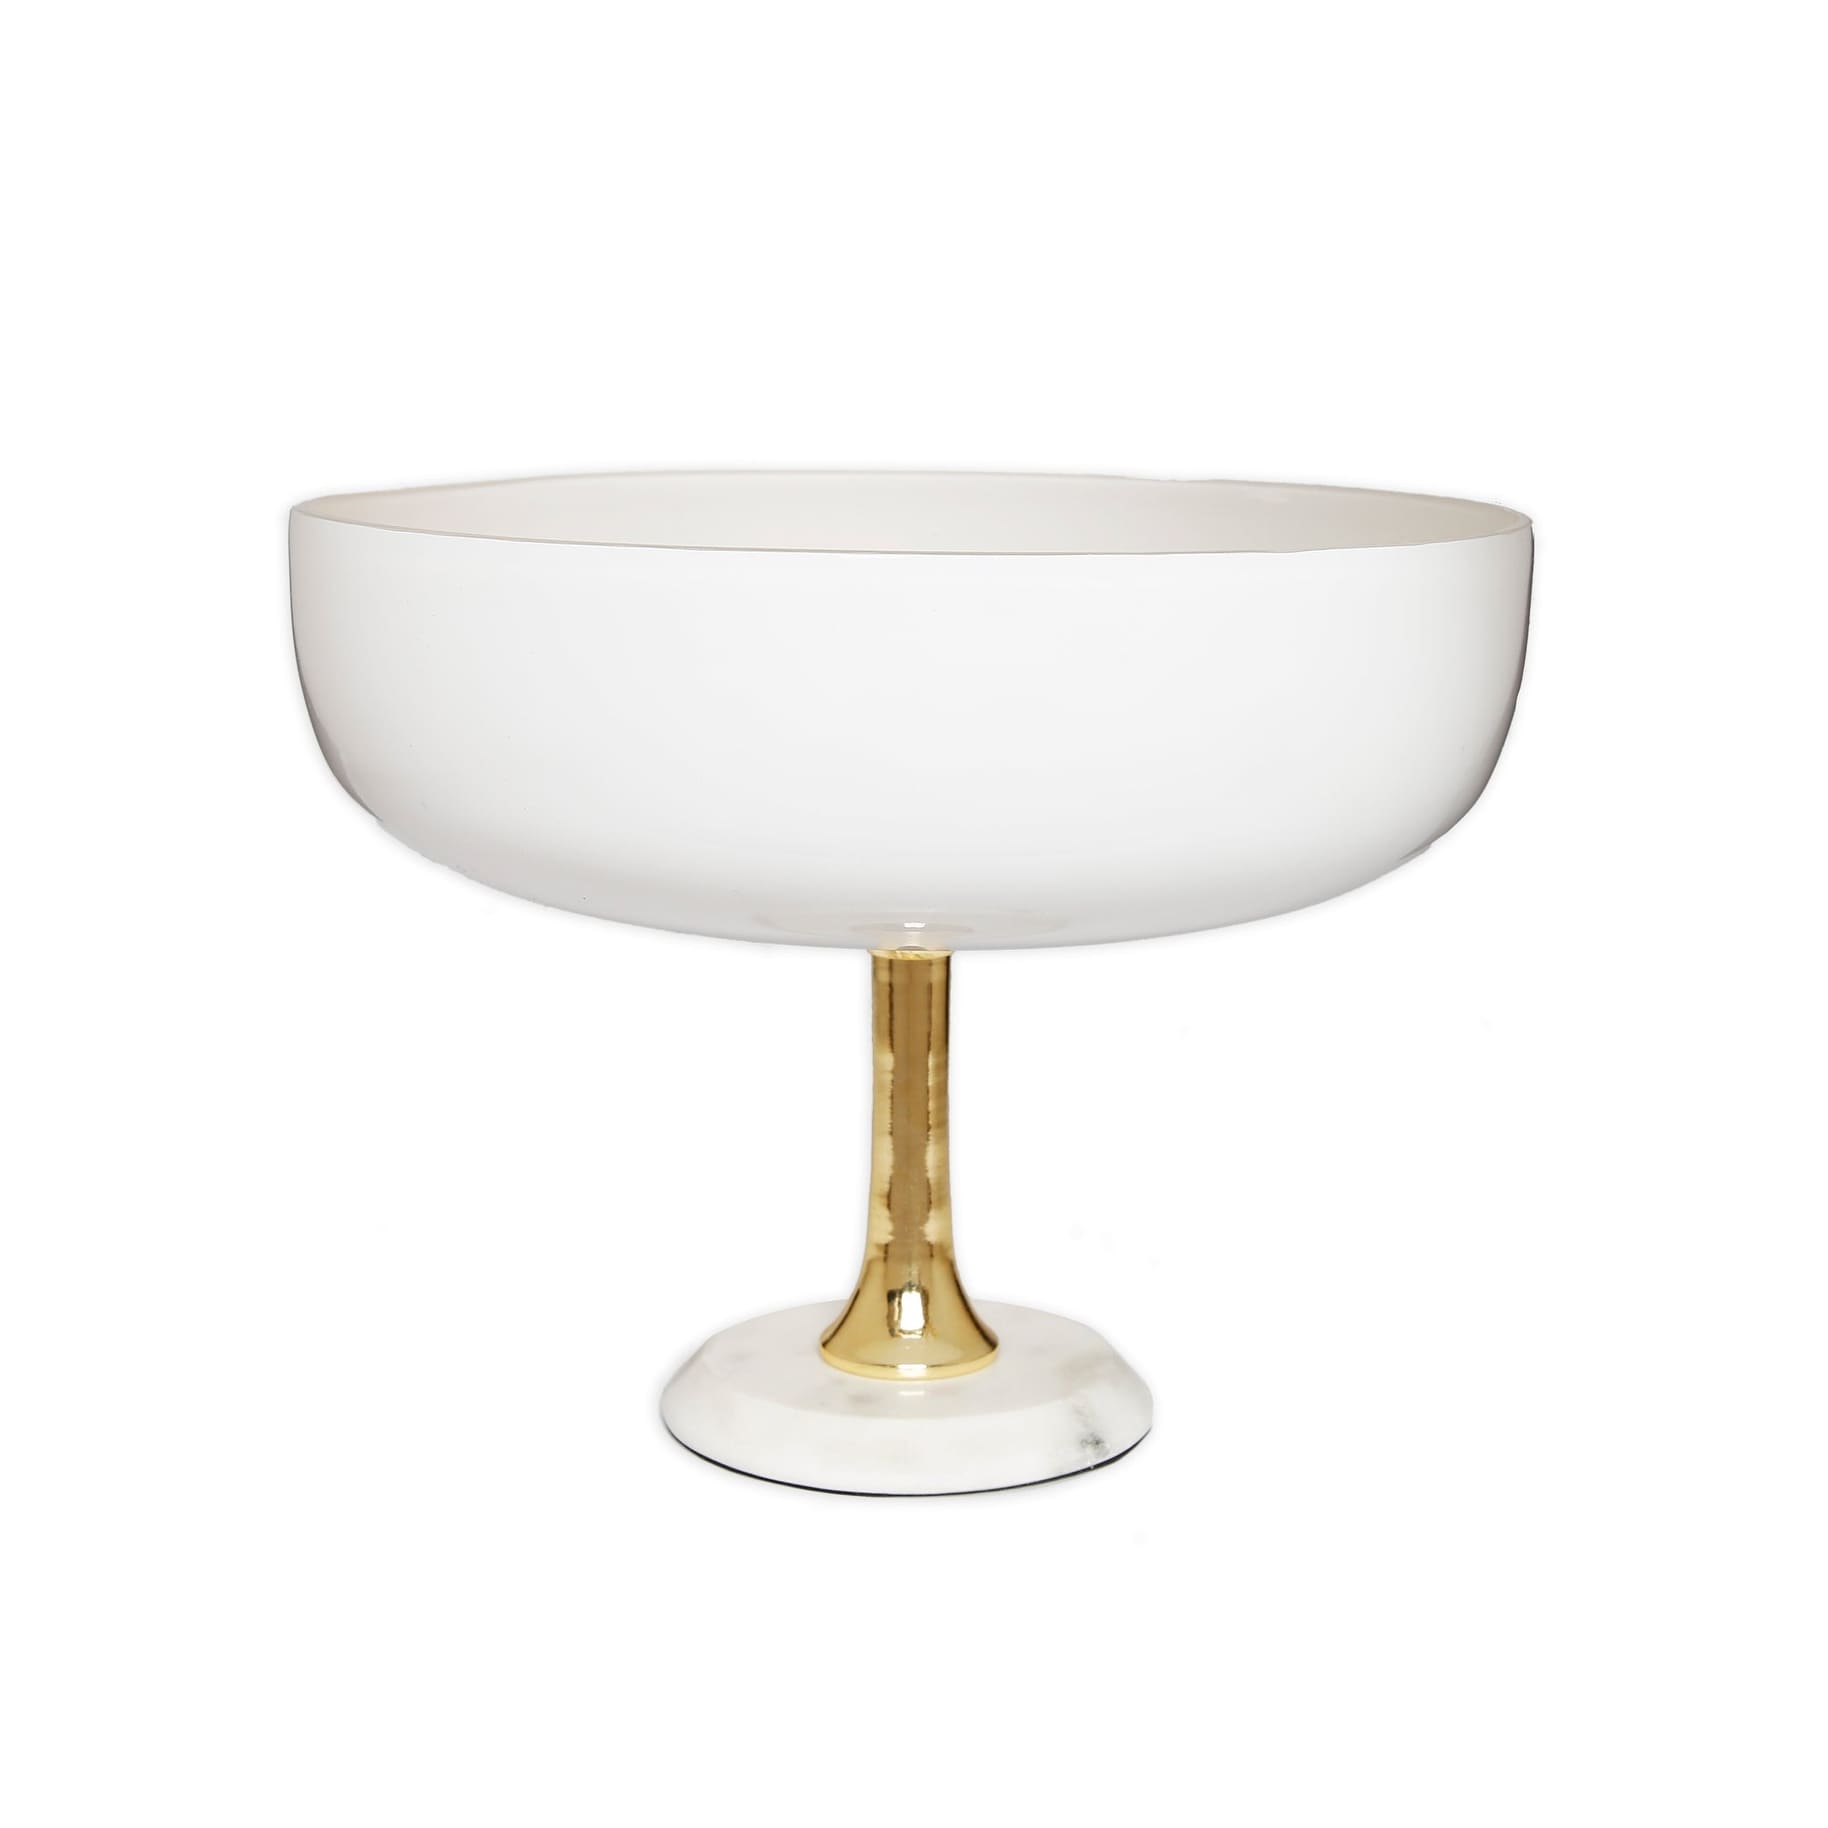 Gold Footed Marble Bowl - 11.75"D